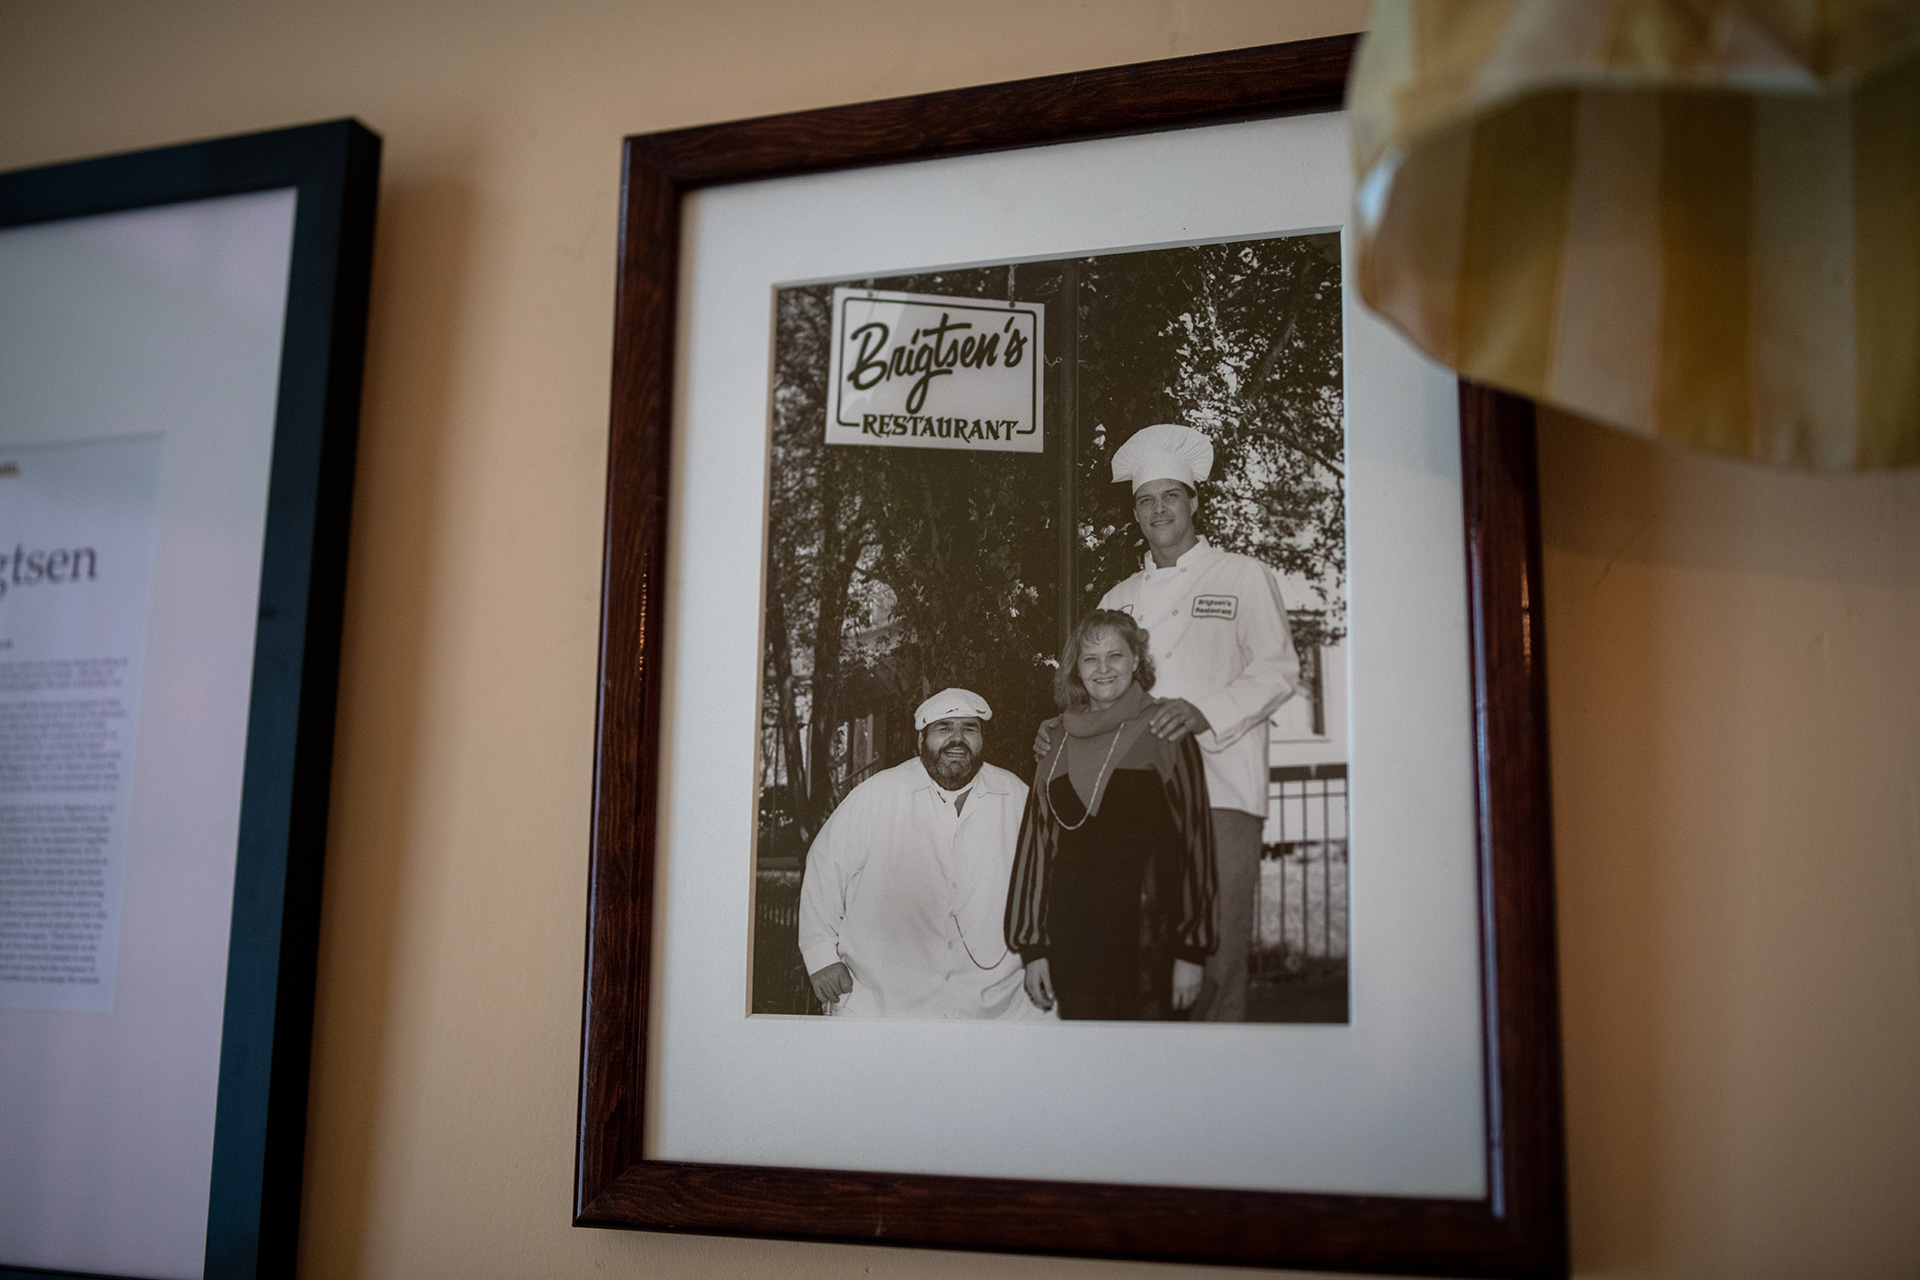 On the wall of their restaurant hangs an old photo of the Brigtsens with their mentor, Chef Paul Prudhomme.